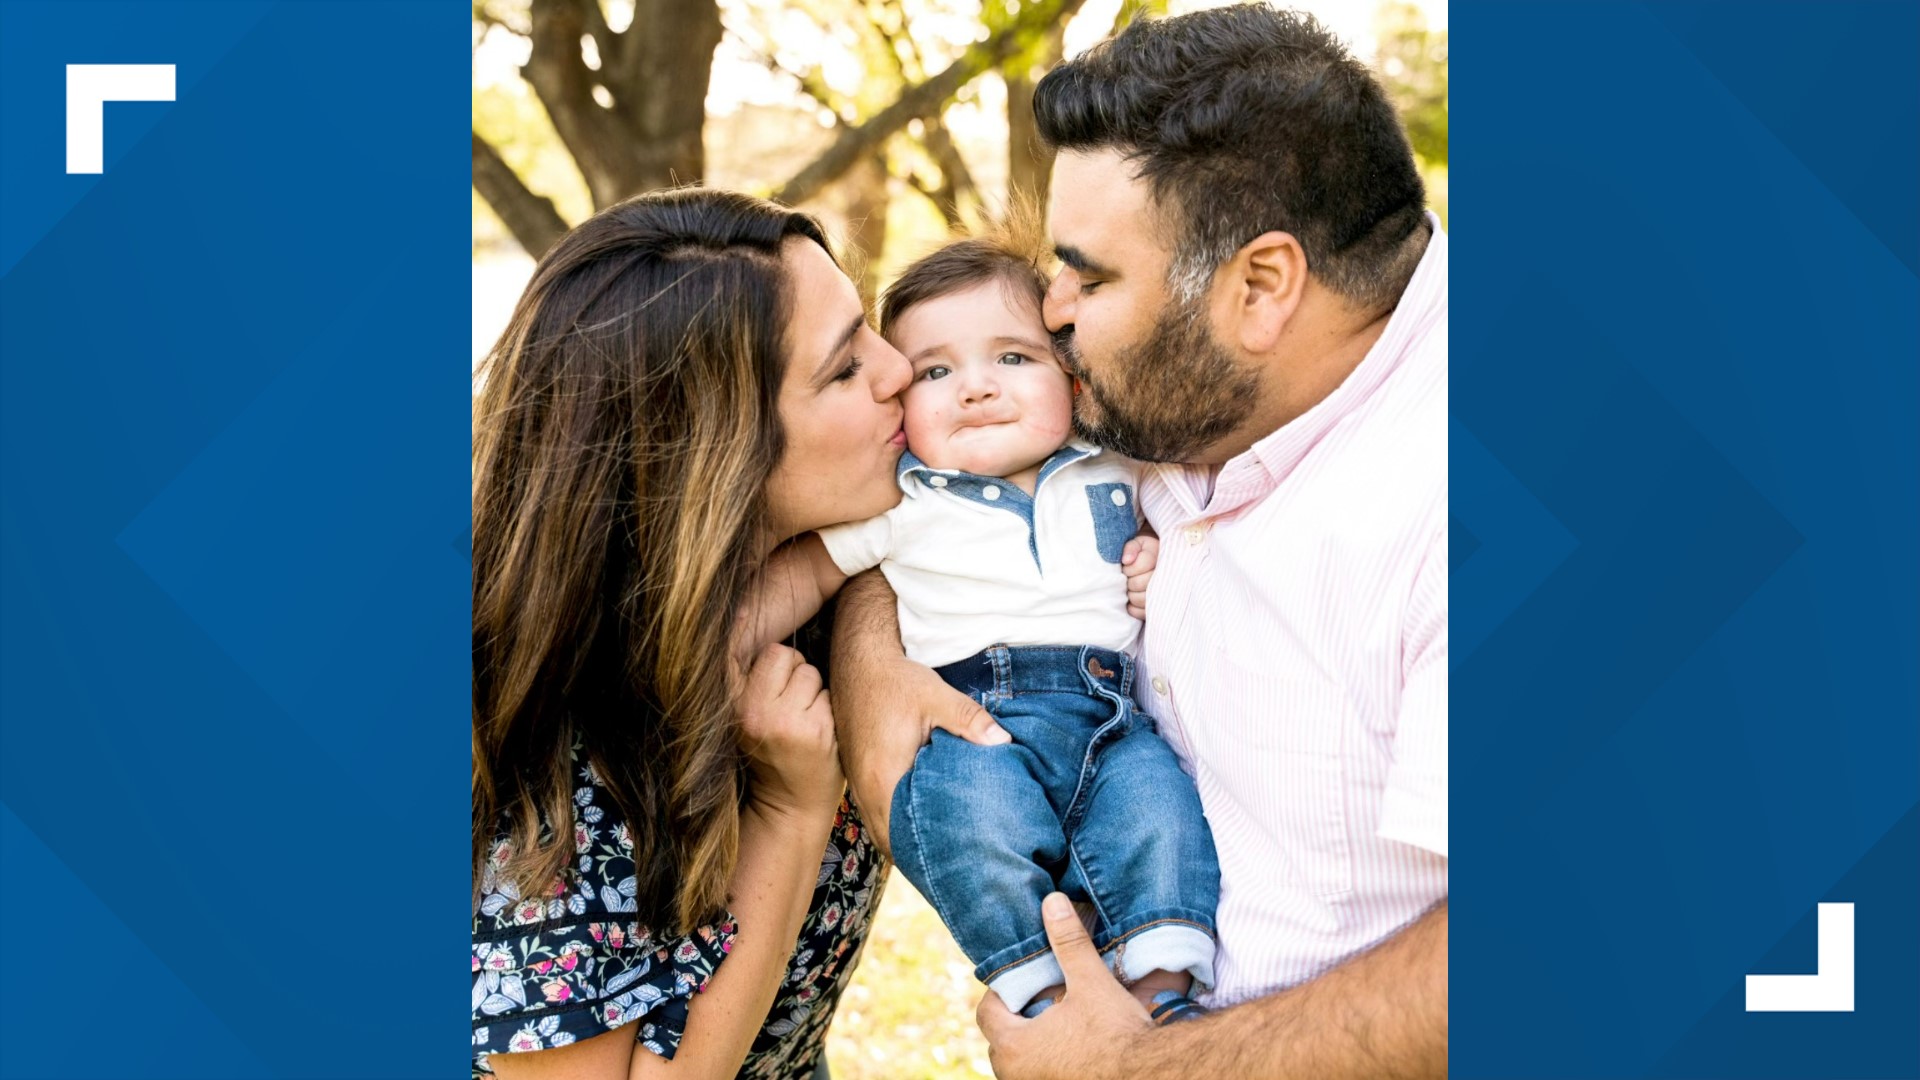 Chase's heart defect was found while Jaime was pregnant, leading to an open-heart surgery at just five days old.